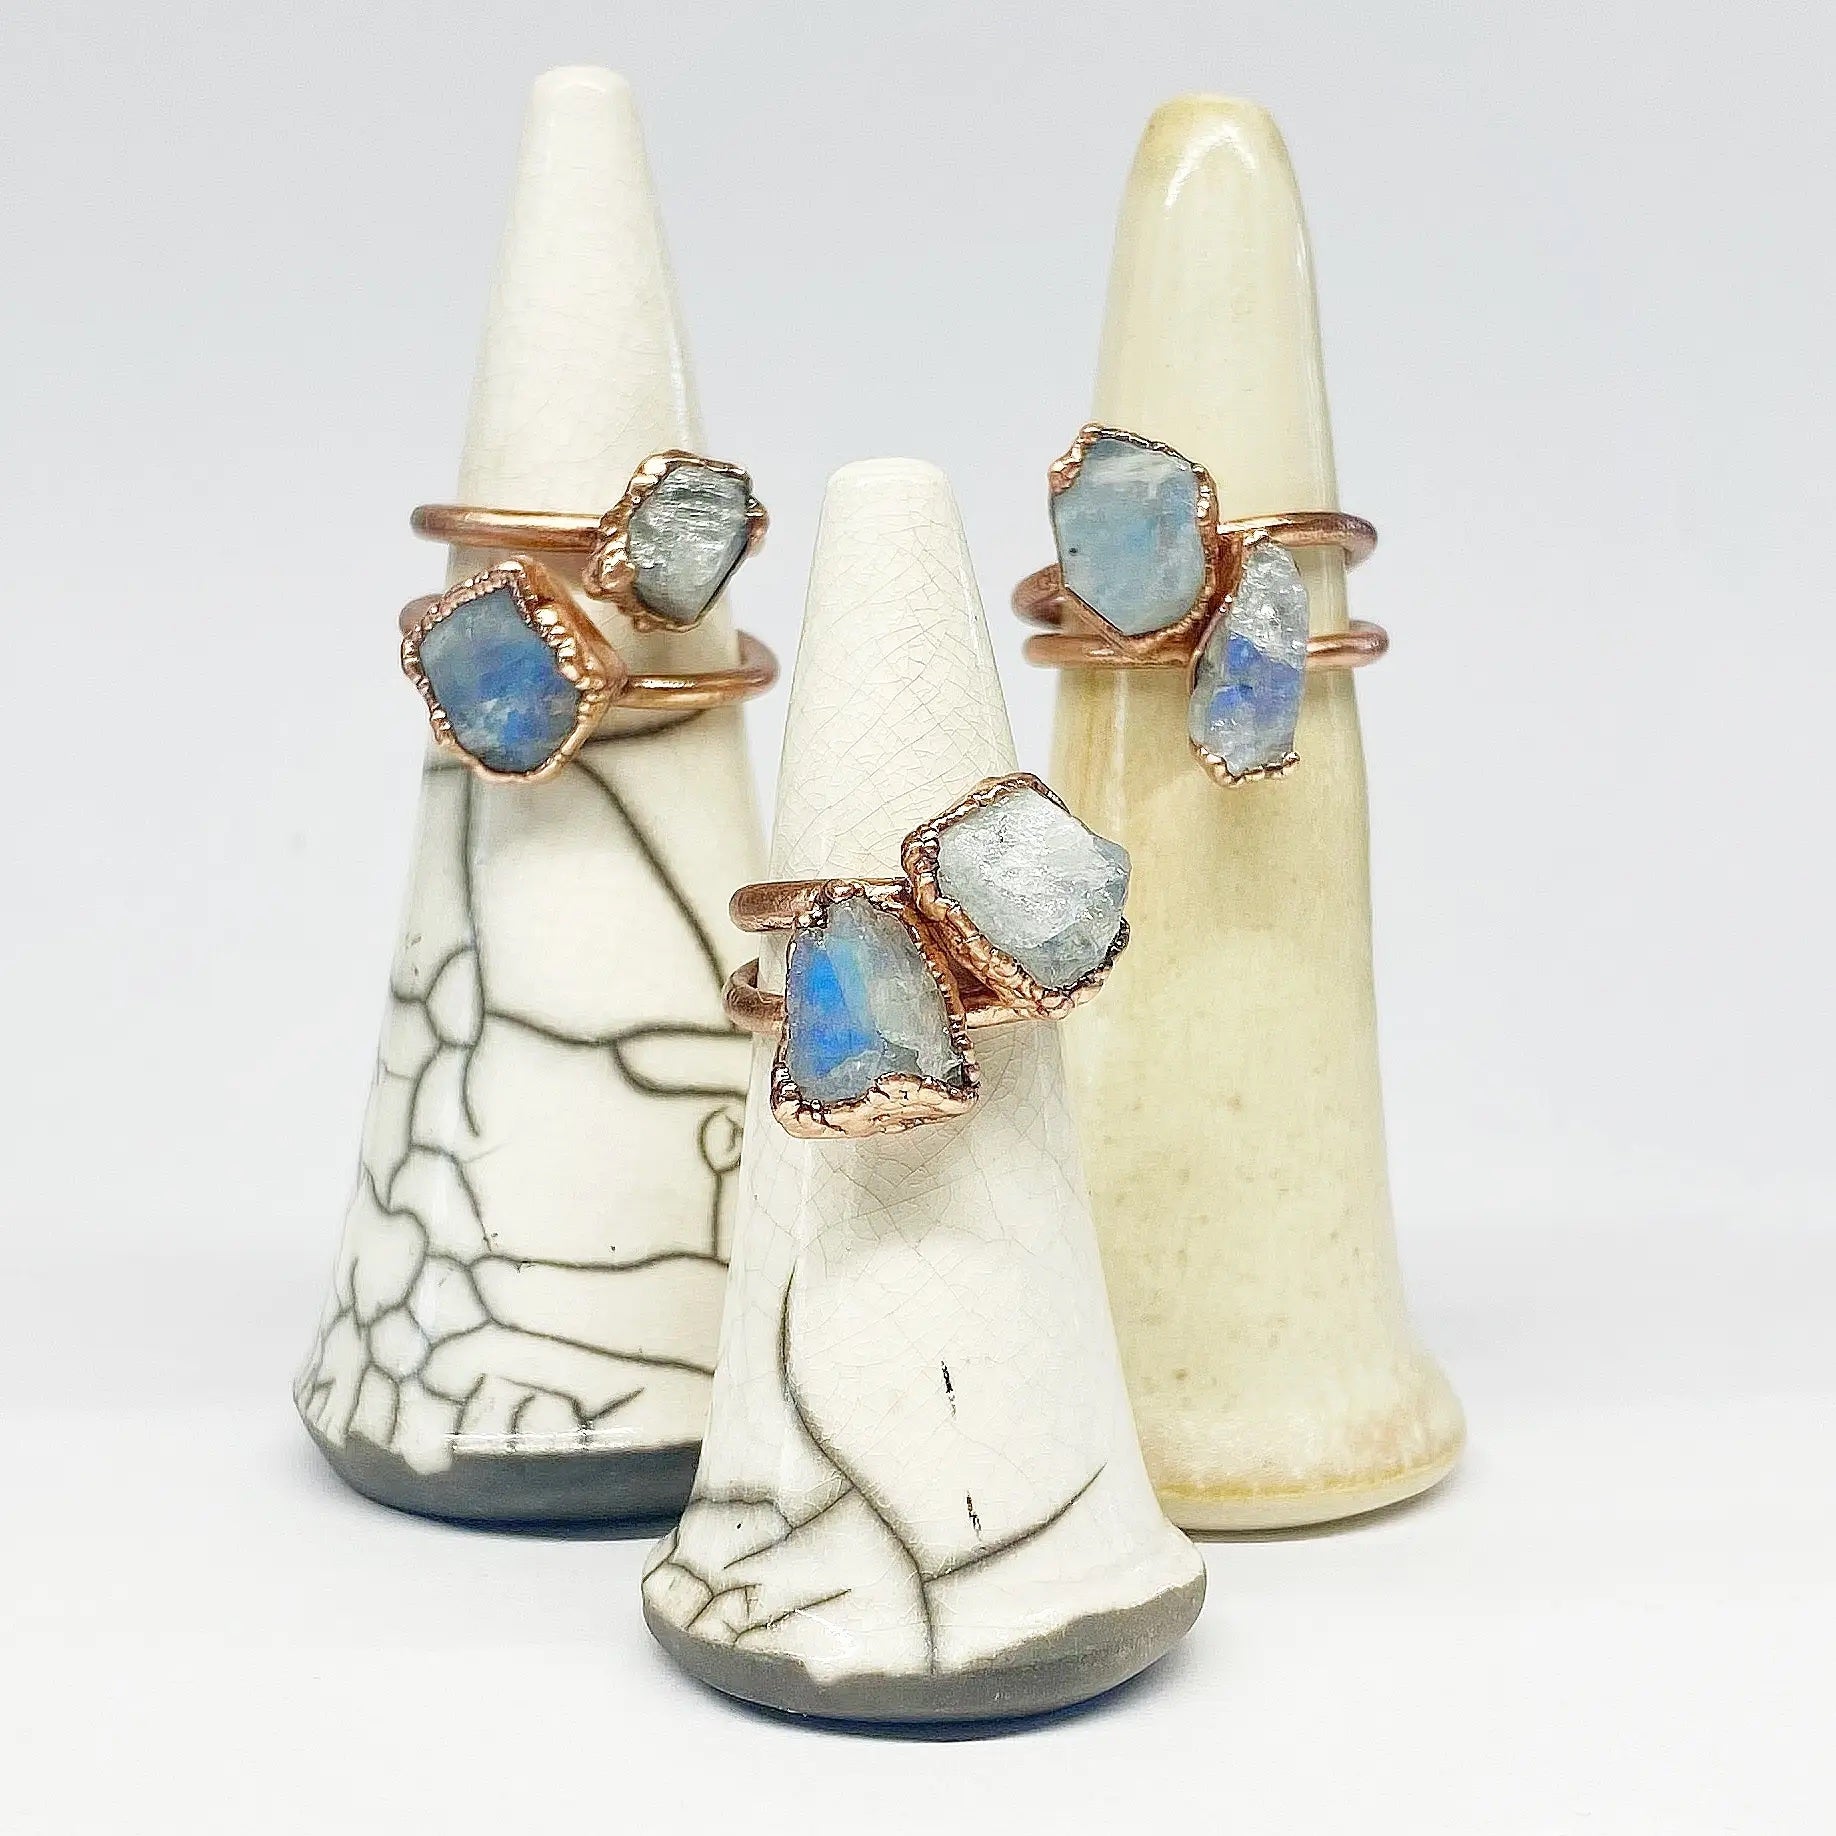 Free Form Rainbow Moonstone Ring (Size US 6.75-8) - Electroformed Copper